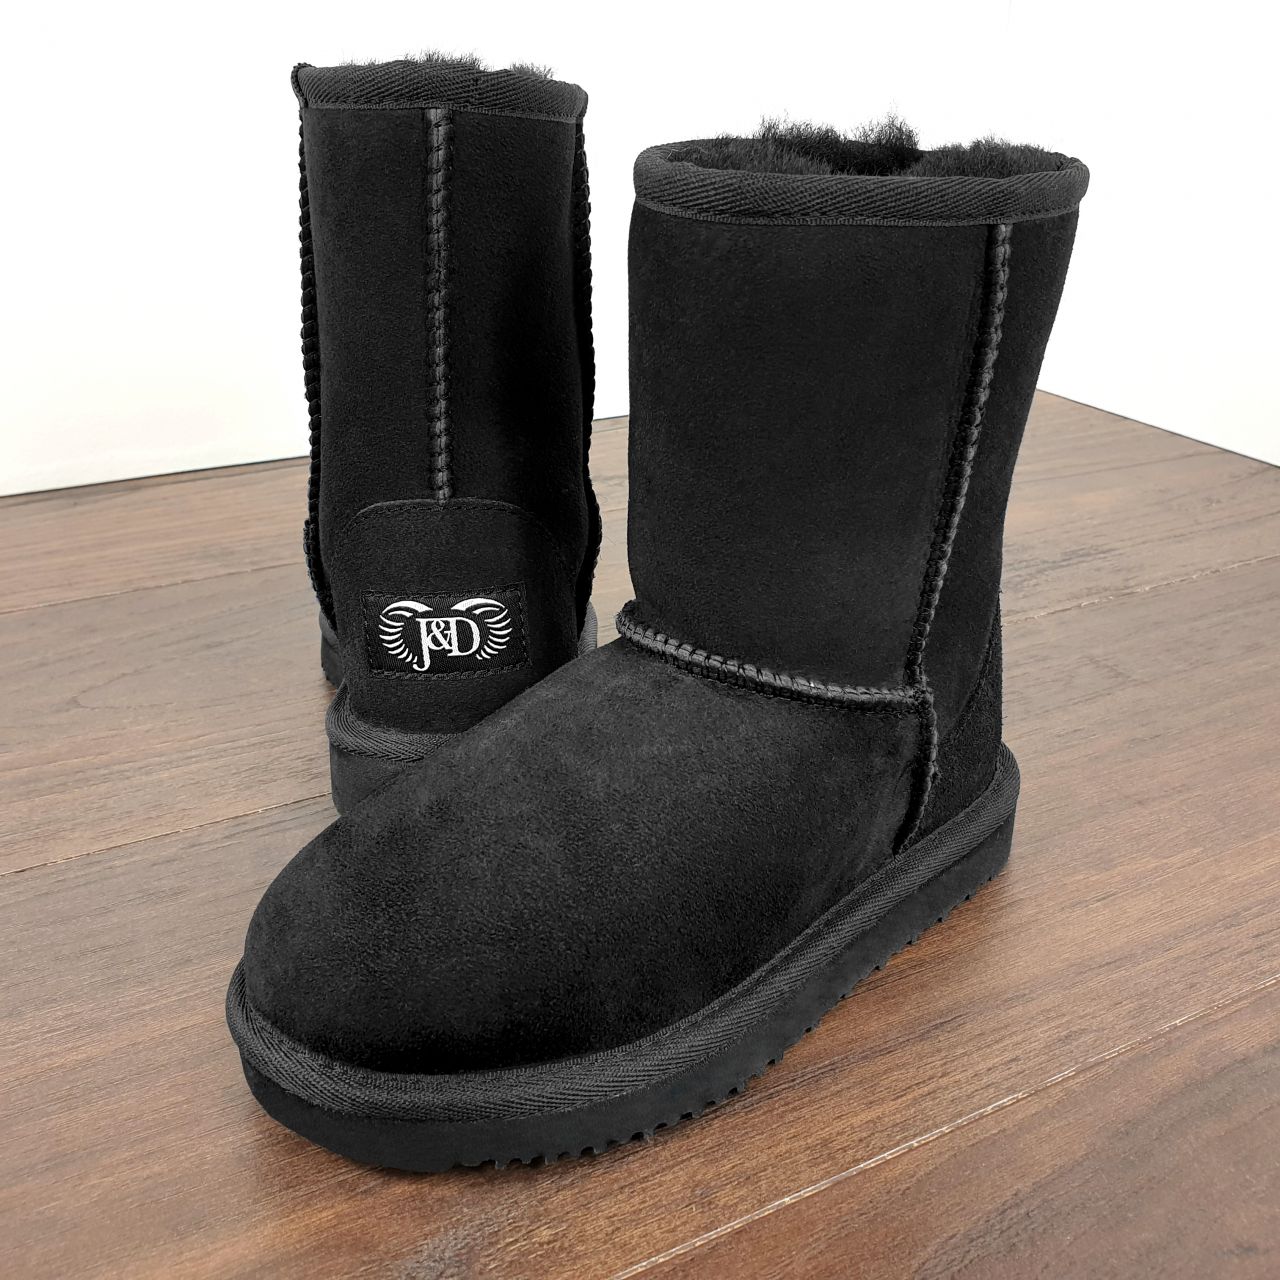 Black Sheepskin Boots for Kids: Real Sheep Skin Products to buy: Jacobs ...